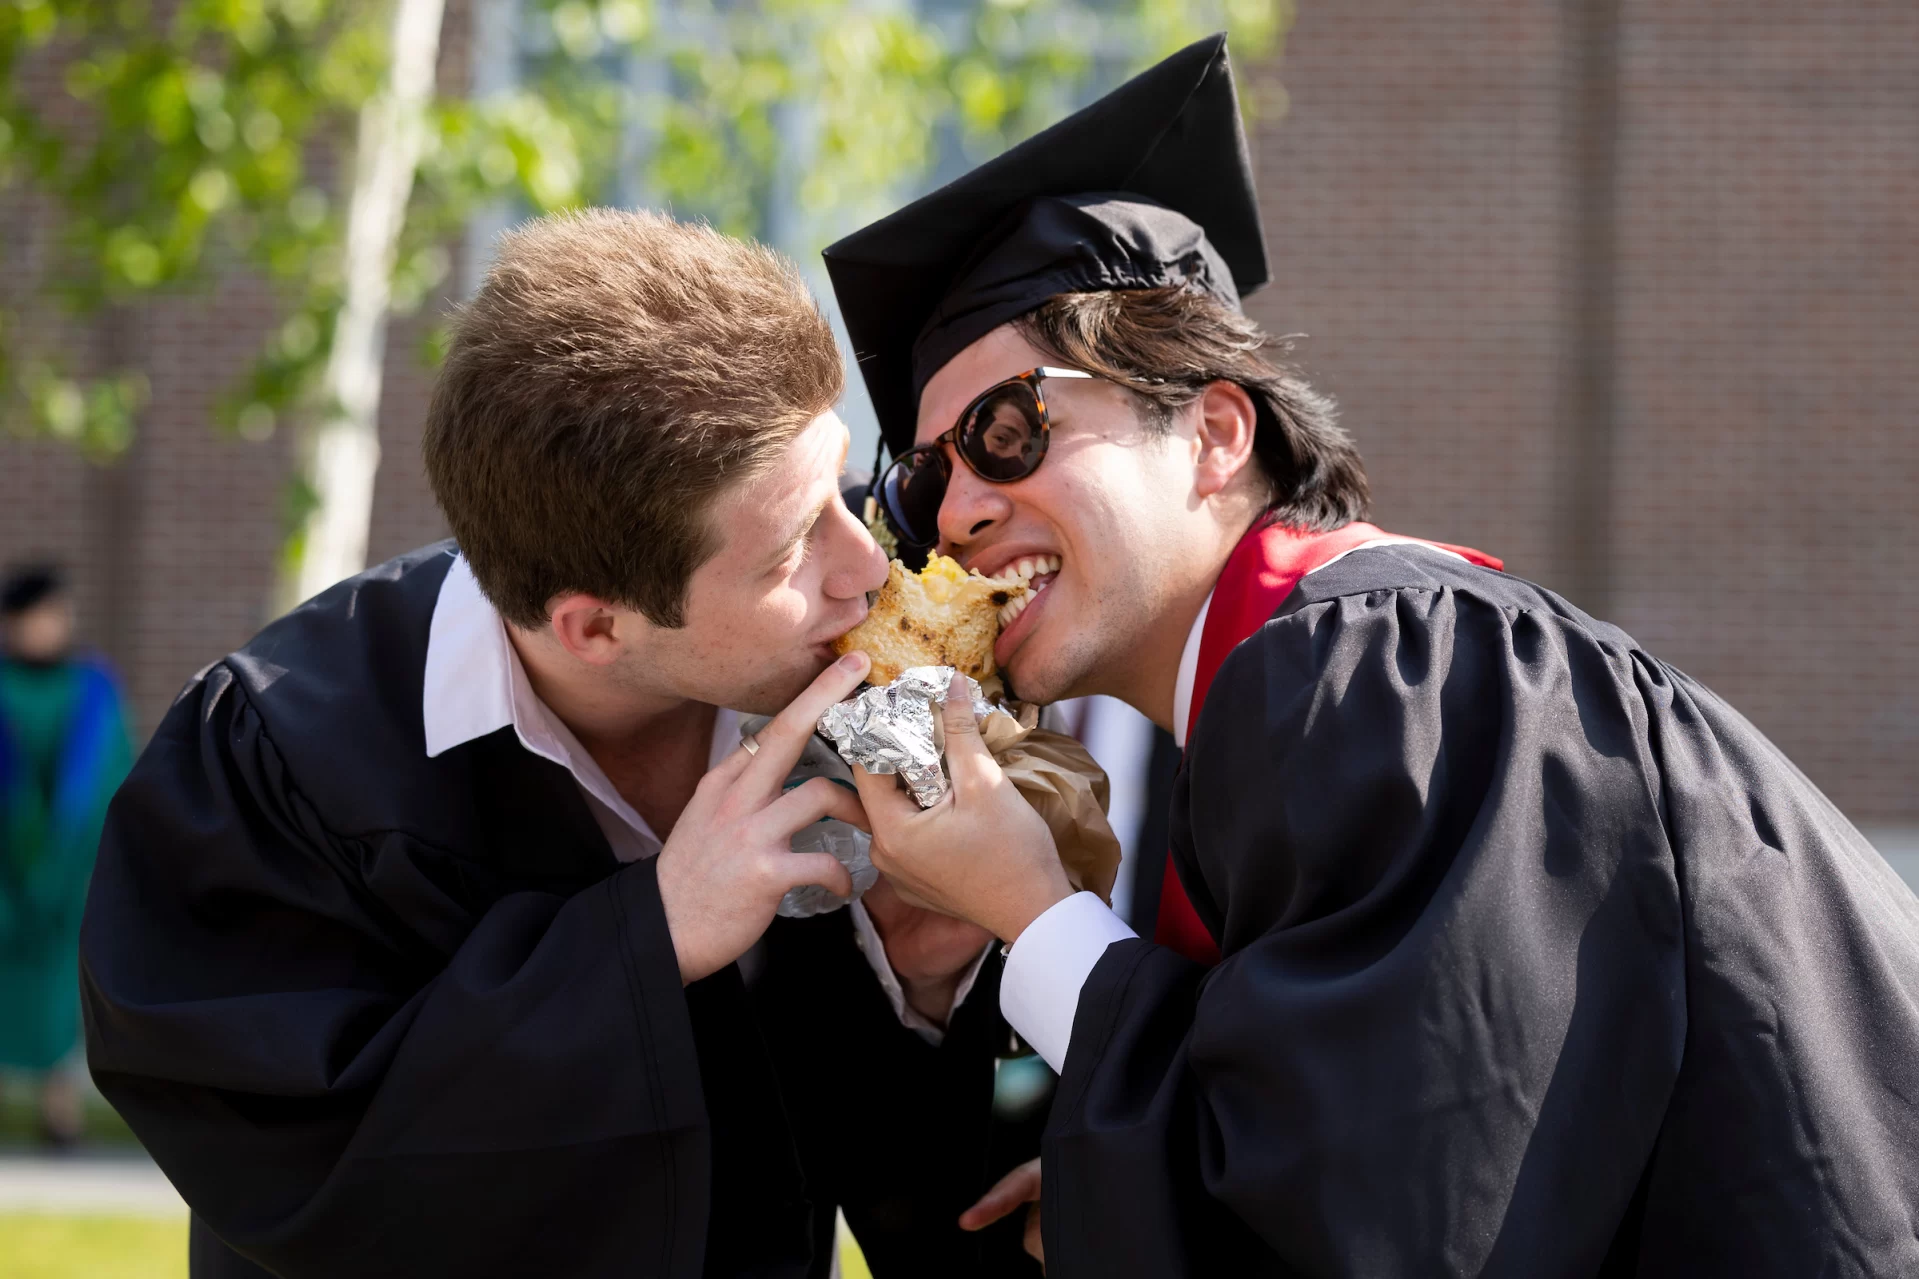 From left, Alek Zelbo '23 and Jaff Gao '23 enjoy their last breakfast sandwich from Forage as they line up on Alumni Walk.


Moments from Commencement morning on May 28, 2023, when members of the Bates Class of 2023 graduated on the Historic Quad. Moments from Commencement morning on May 28, 2023, when members of the Bates Class of 2023 graduated on the Historic Quad.